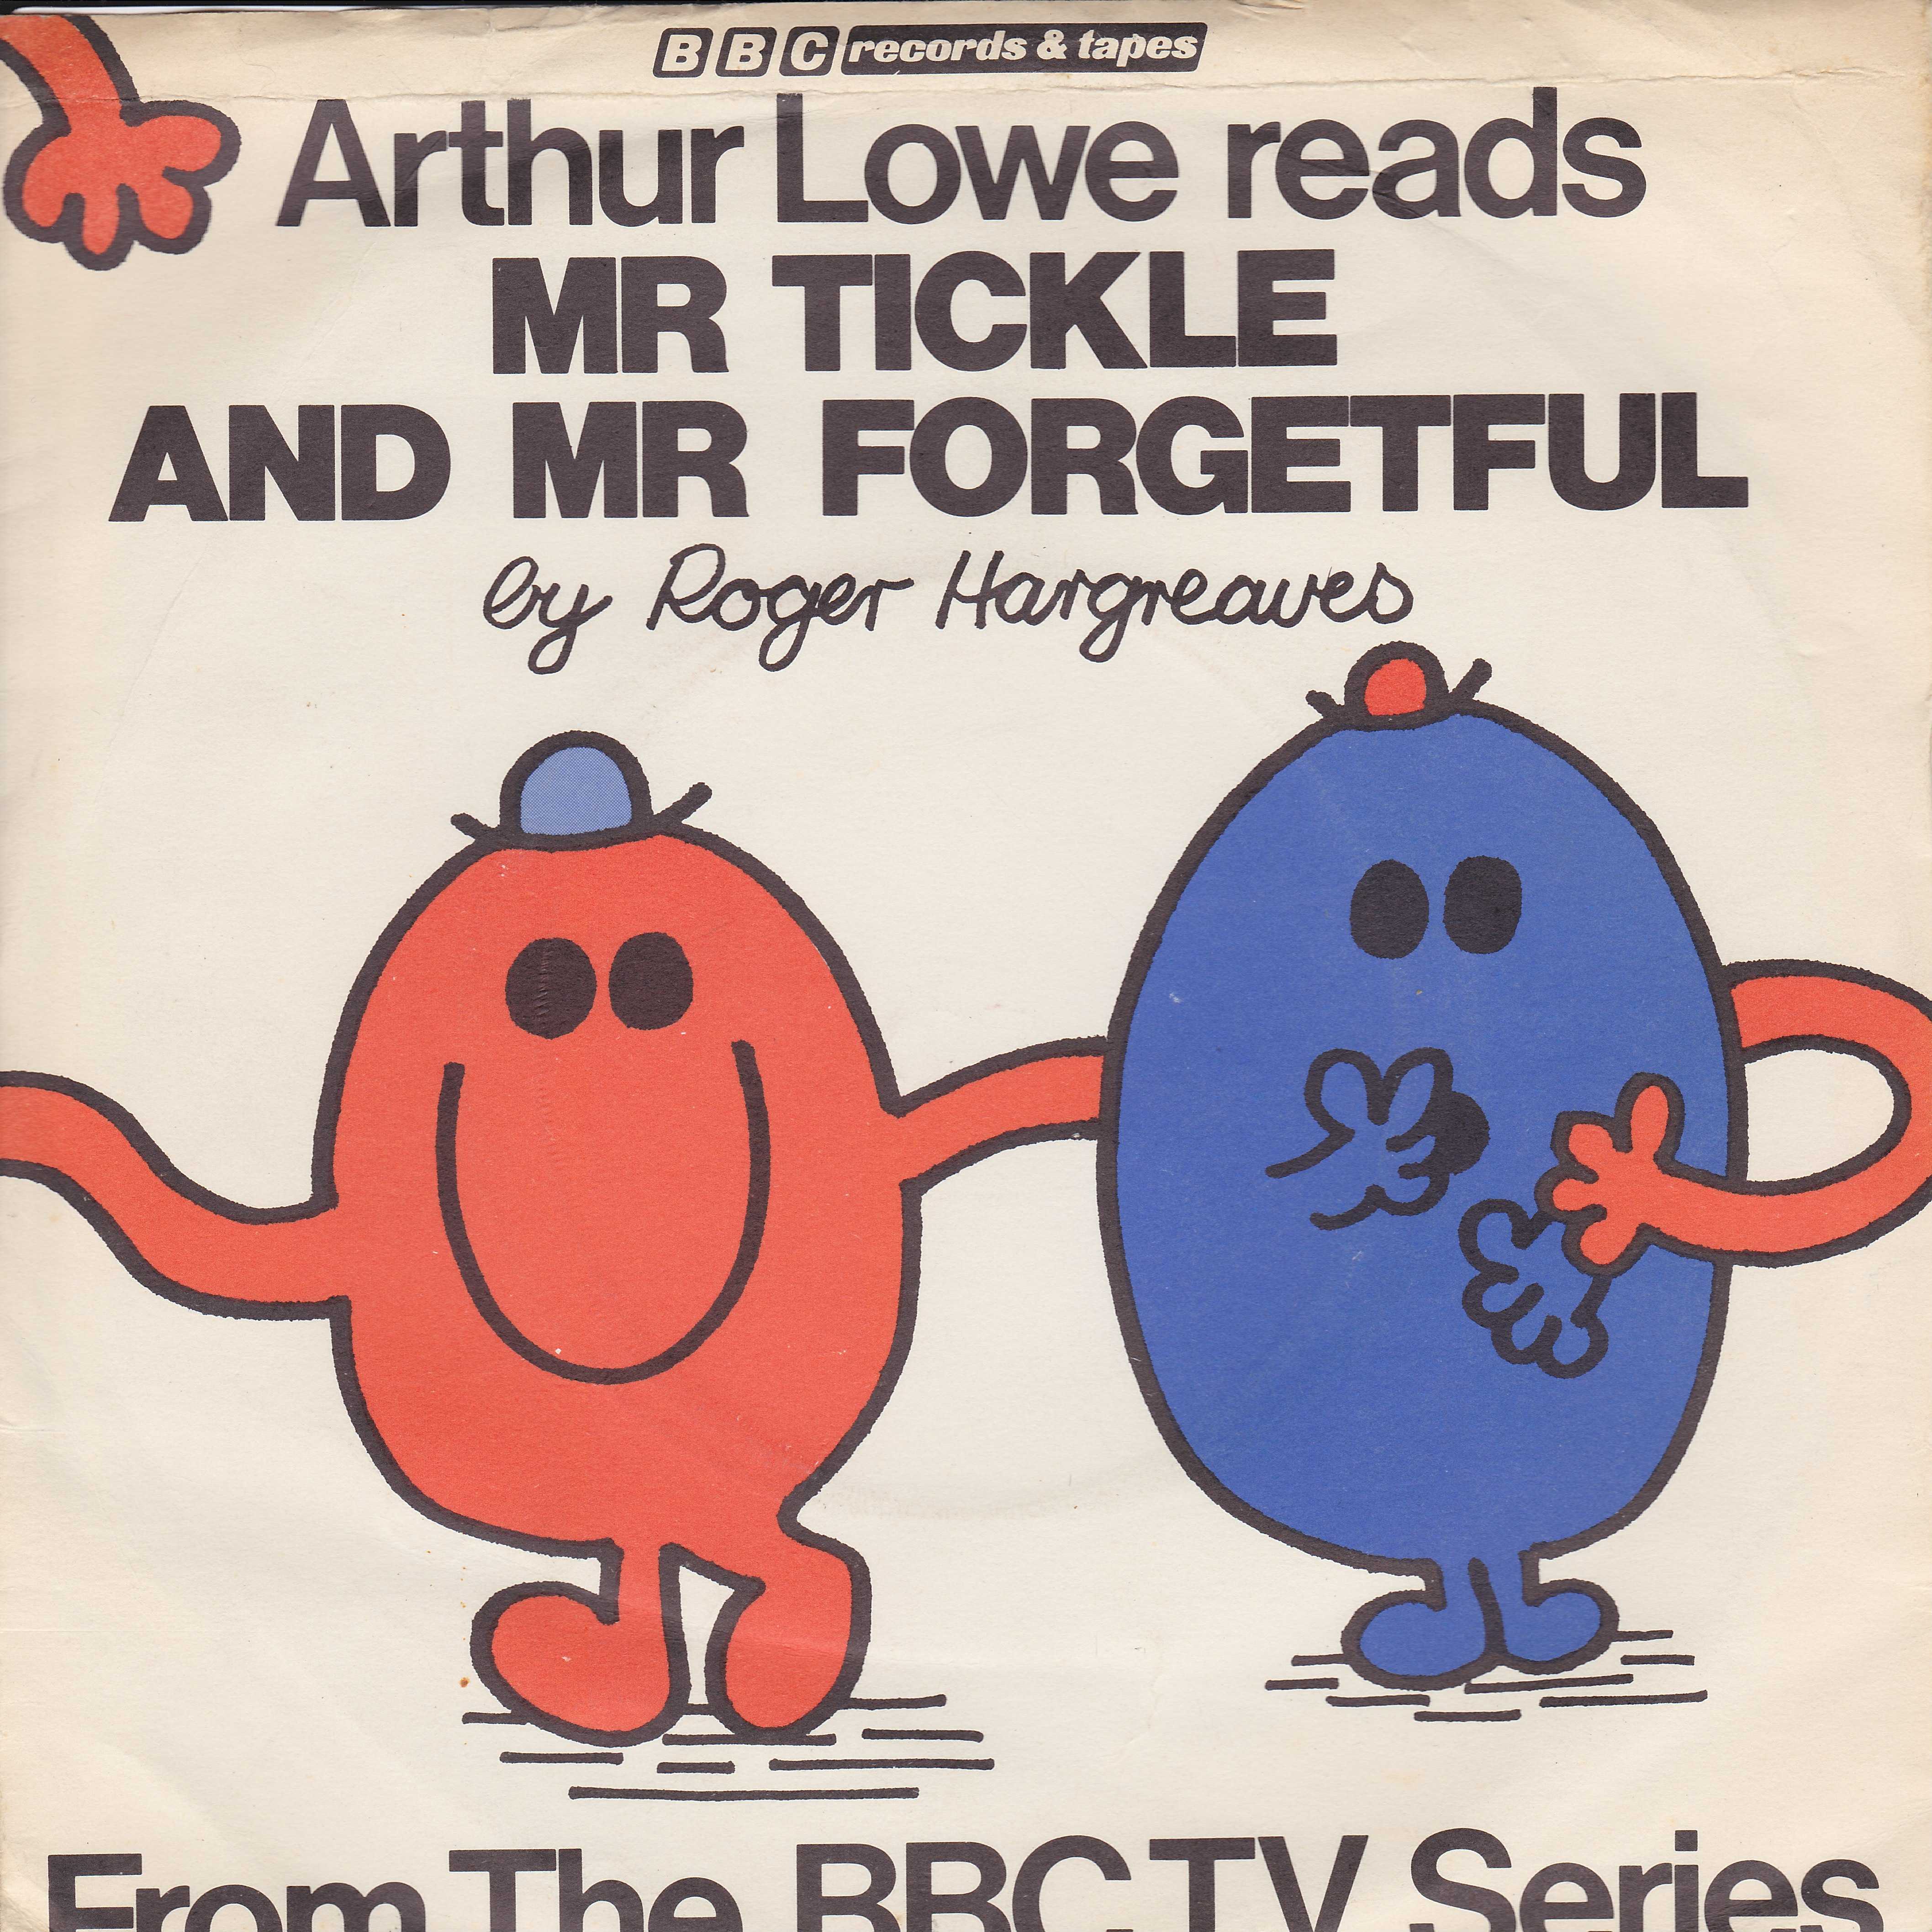 Picture of RESL 43 Mr Men - Mr Tickle single by artist Roger Hargreaves from the BBC records and Tapes library